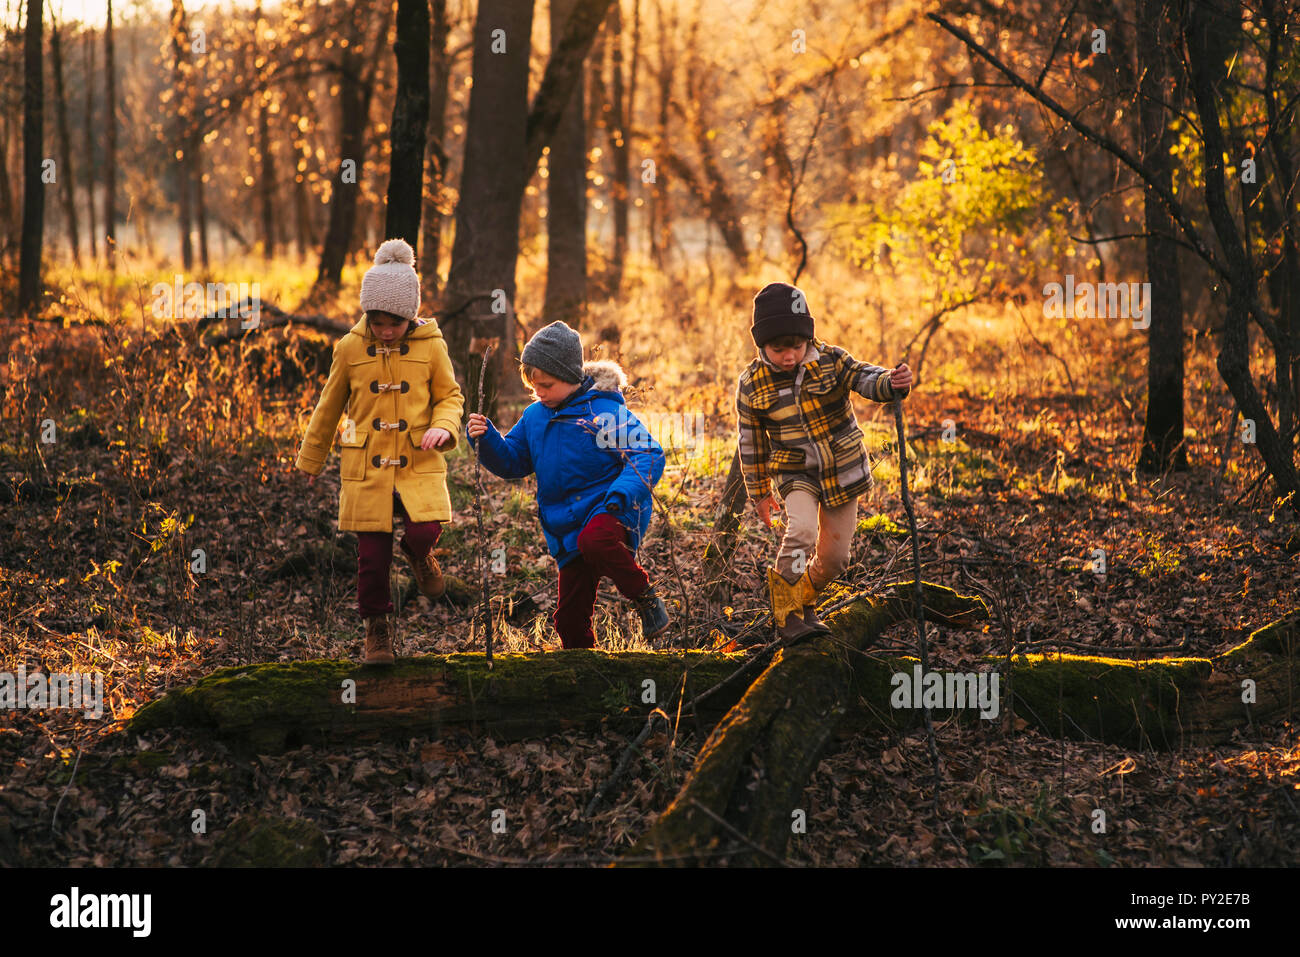 Three children playing in the woods, United States Stock Photo